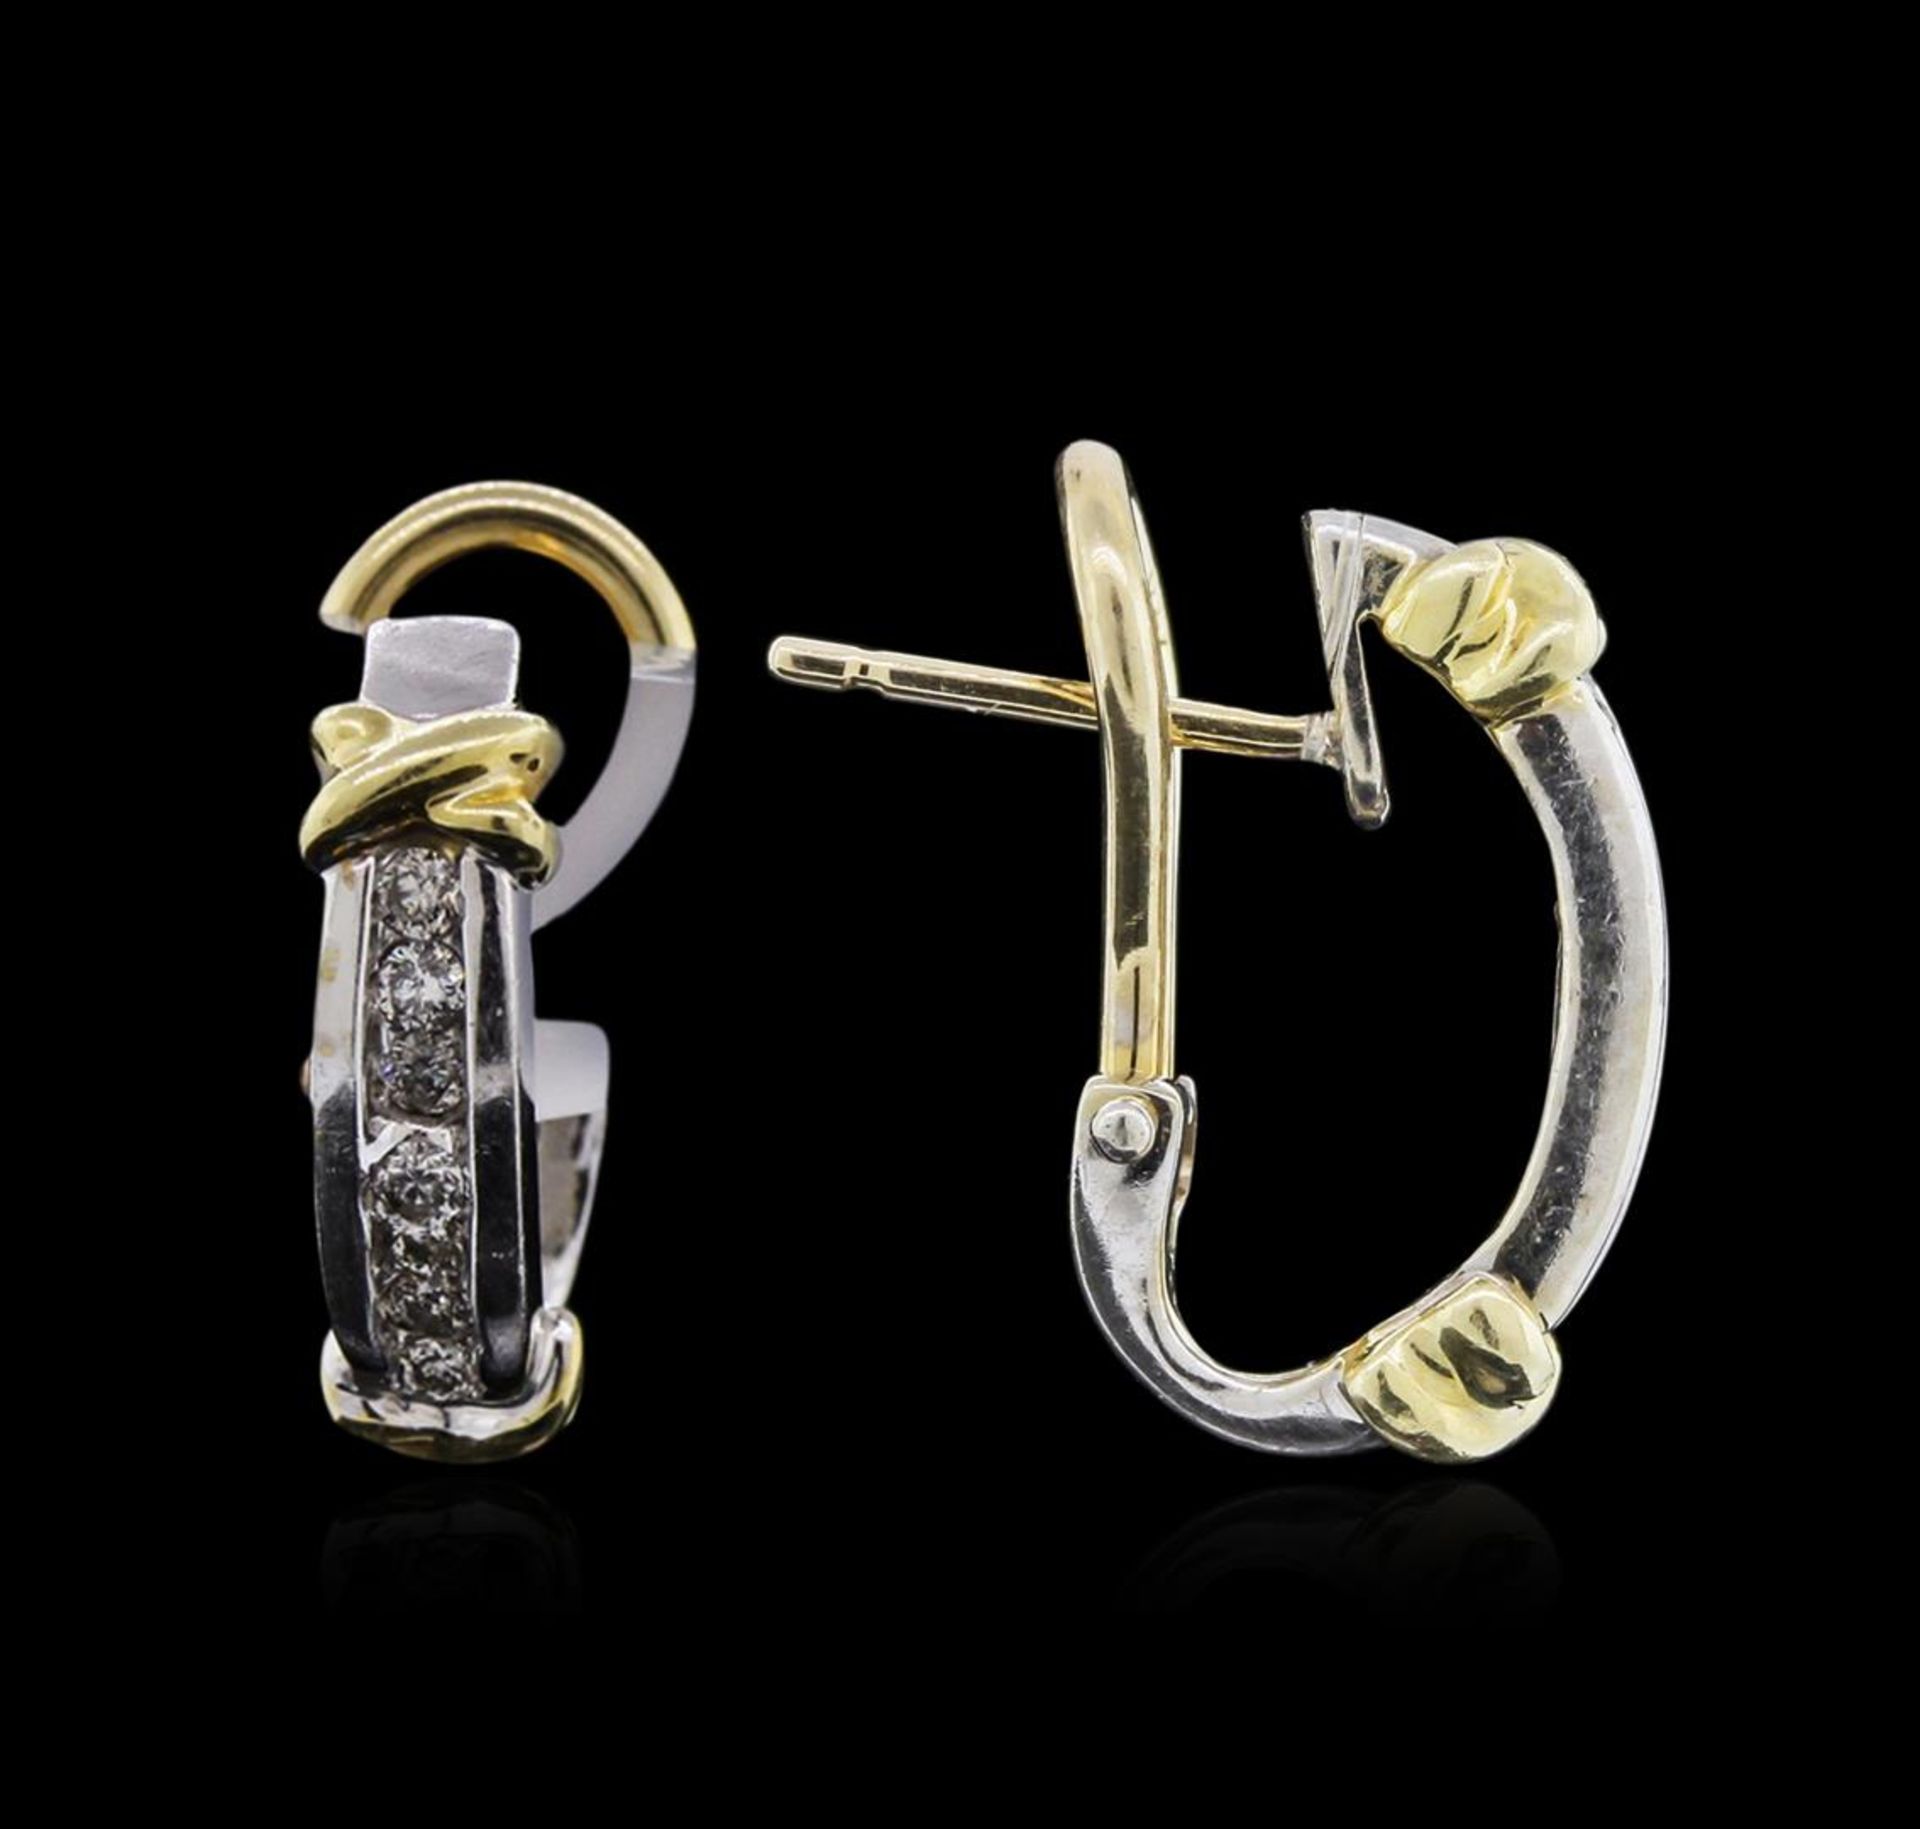 14KT Two-Tone Gold 0.22 ctw Diamond Earrings - Image 2 of 2